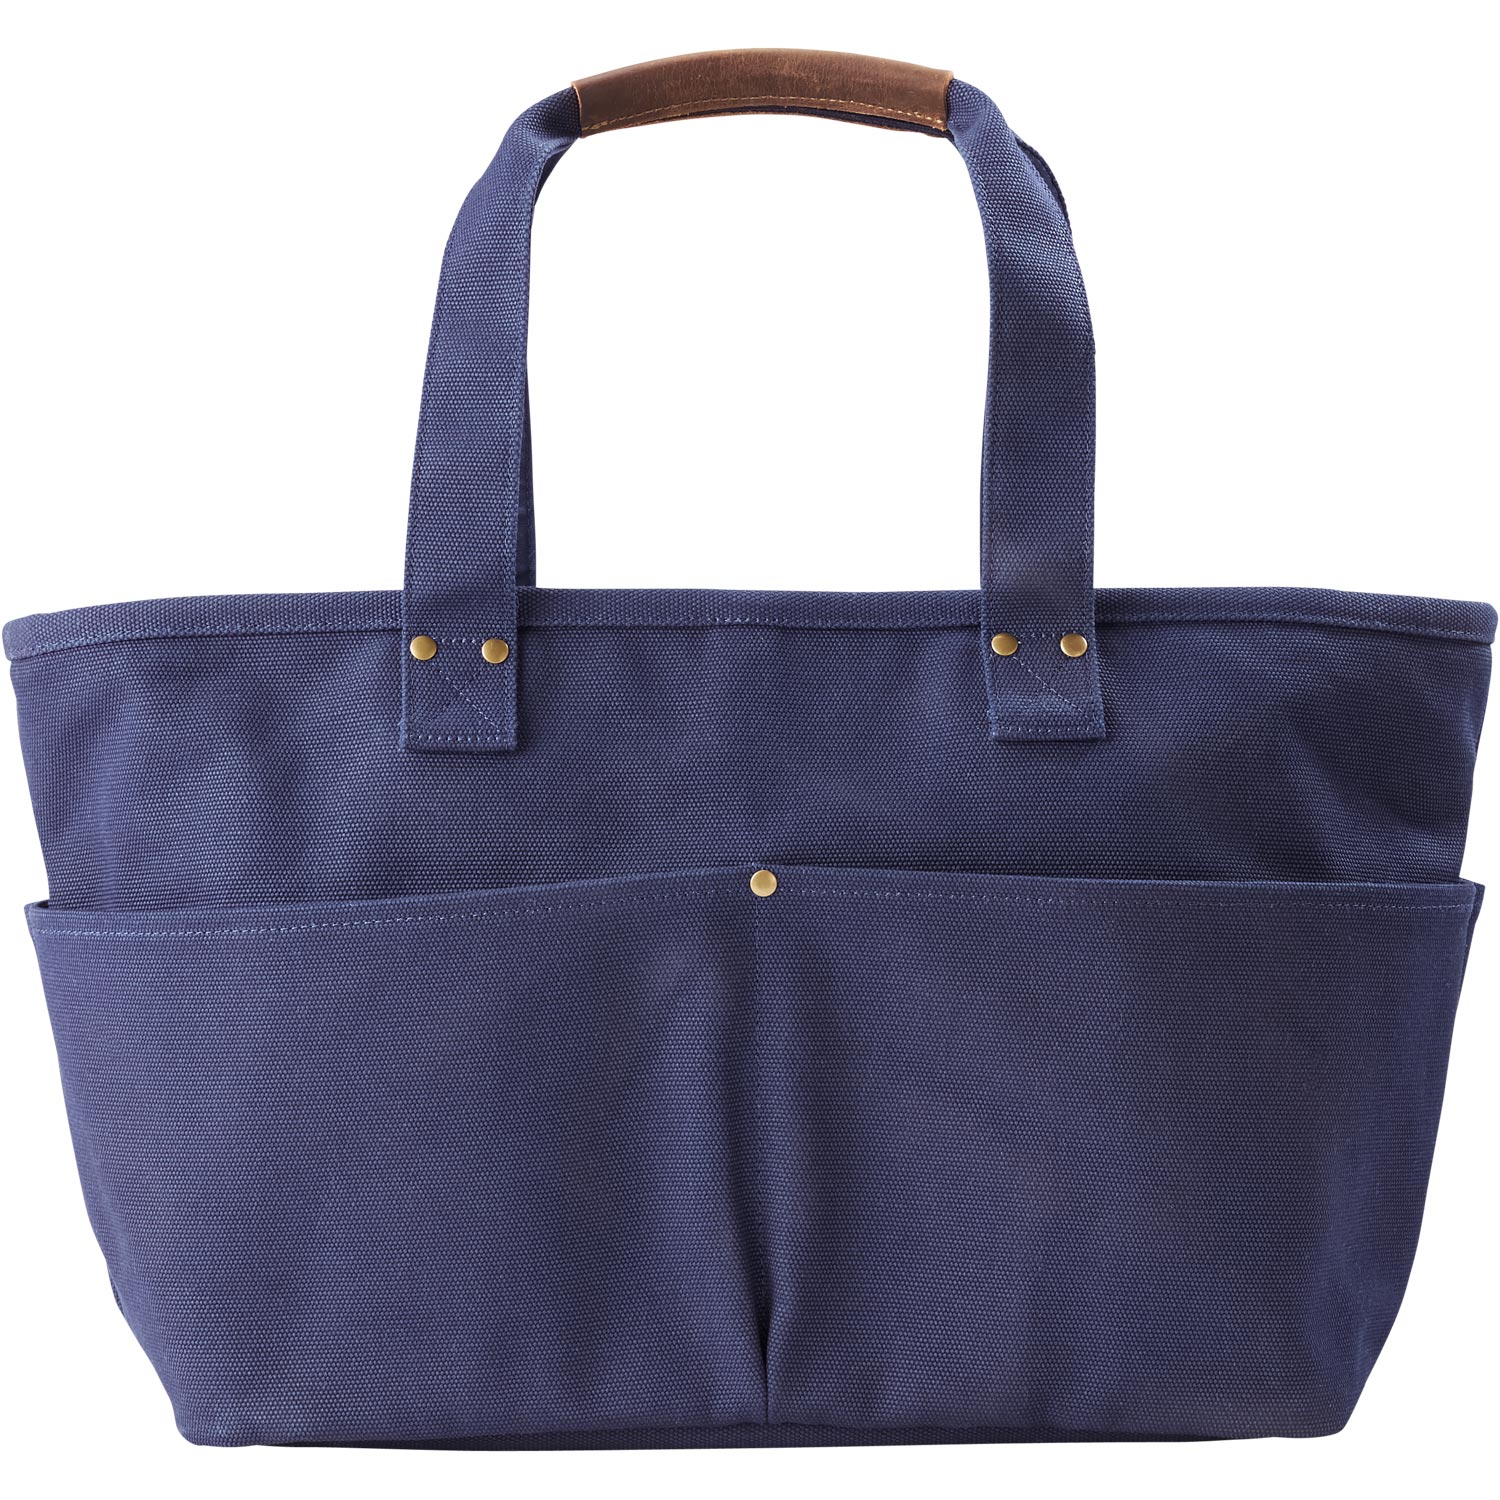 Women's Garden Utility Tote Bag | Duluth Trading Company